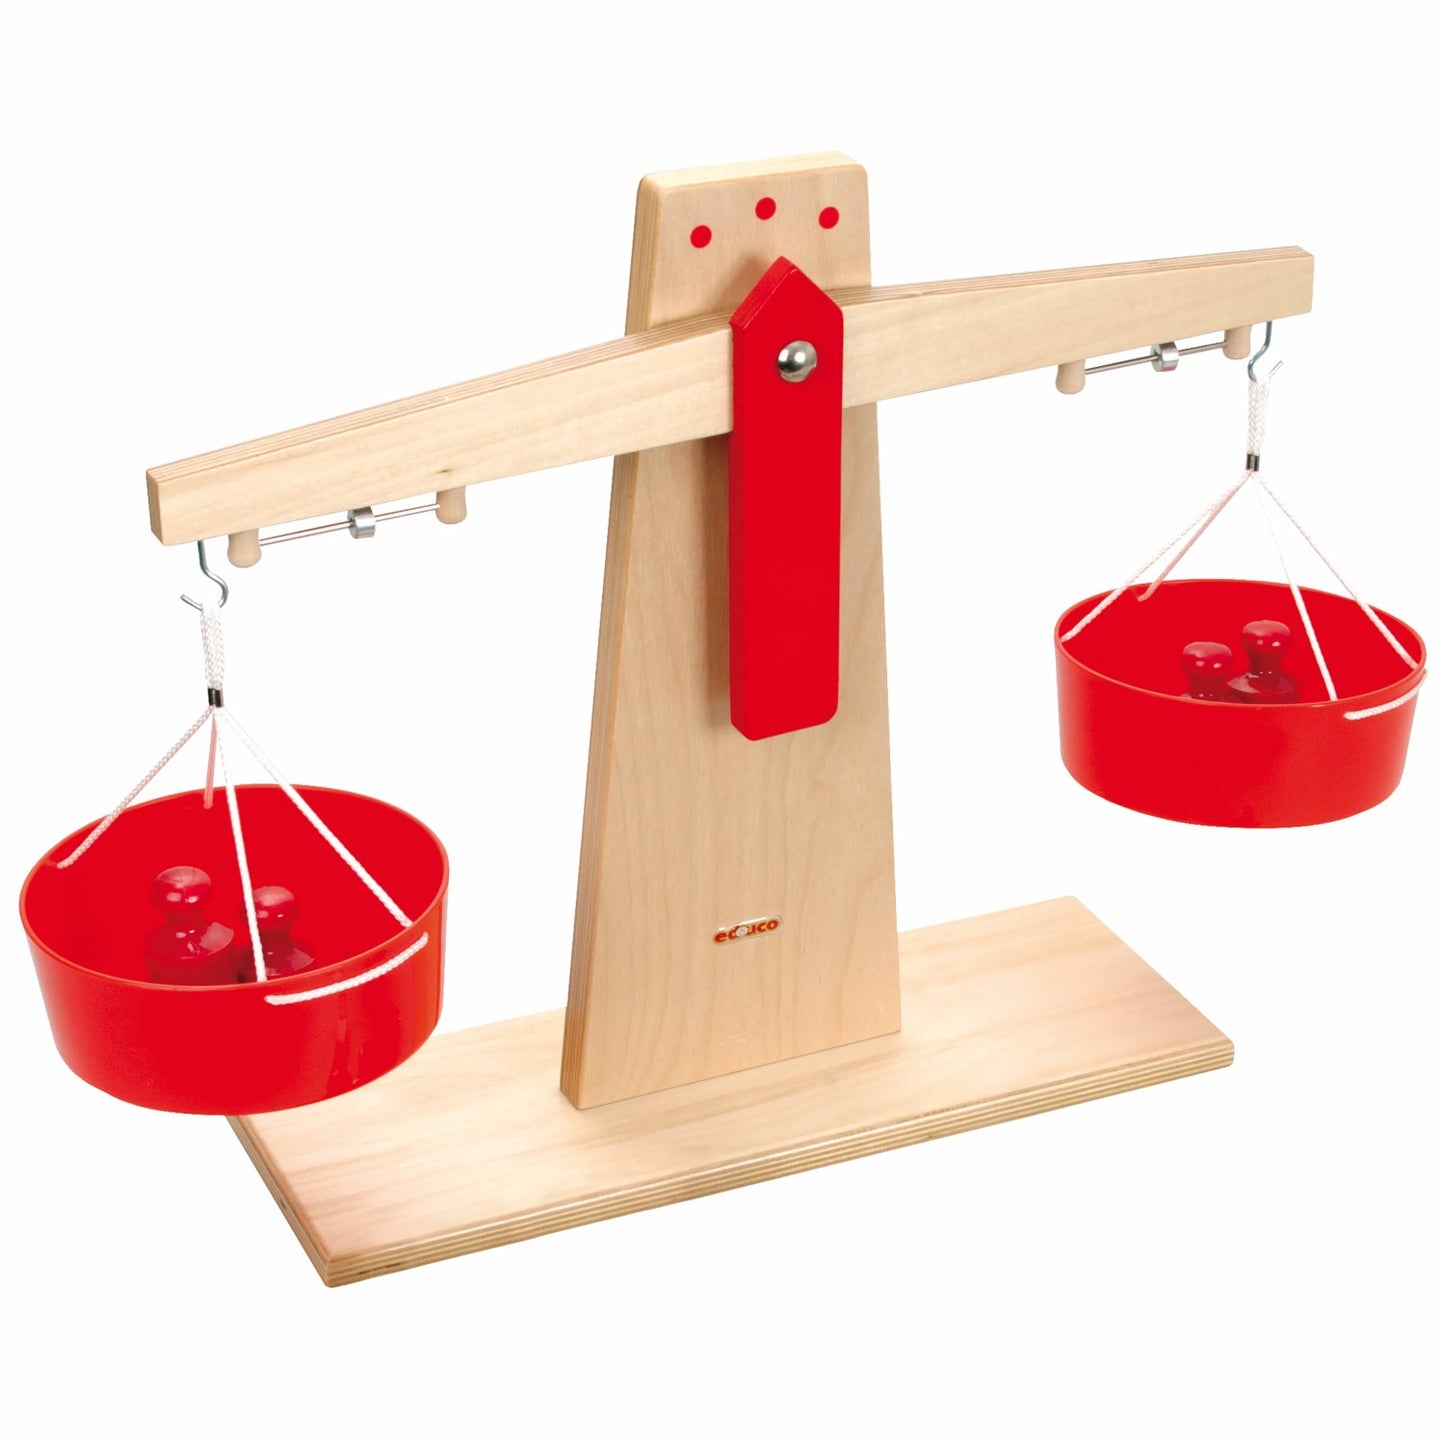 Wooden Scales without weights